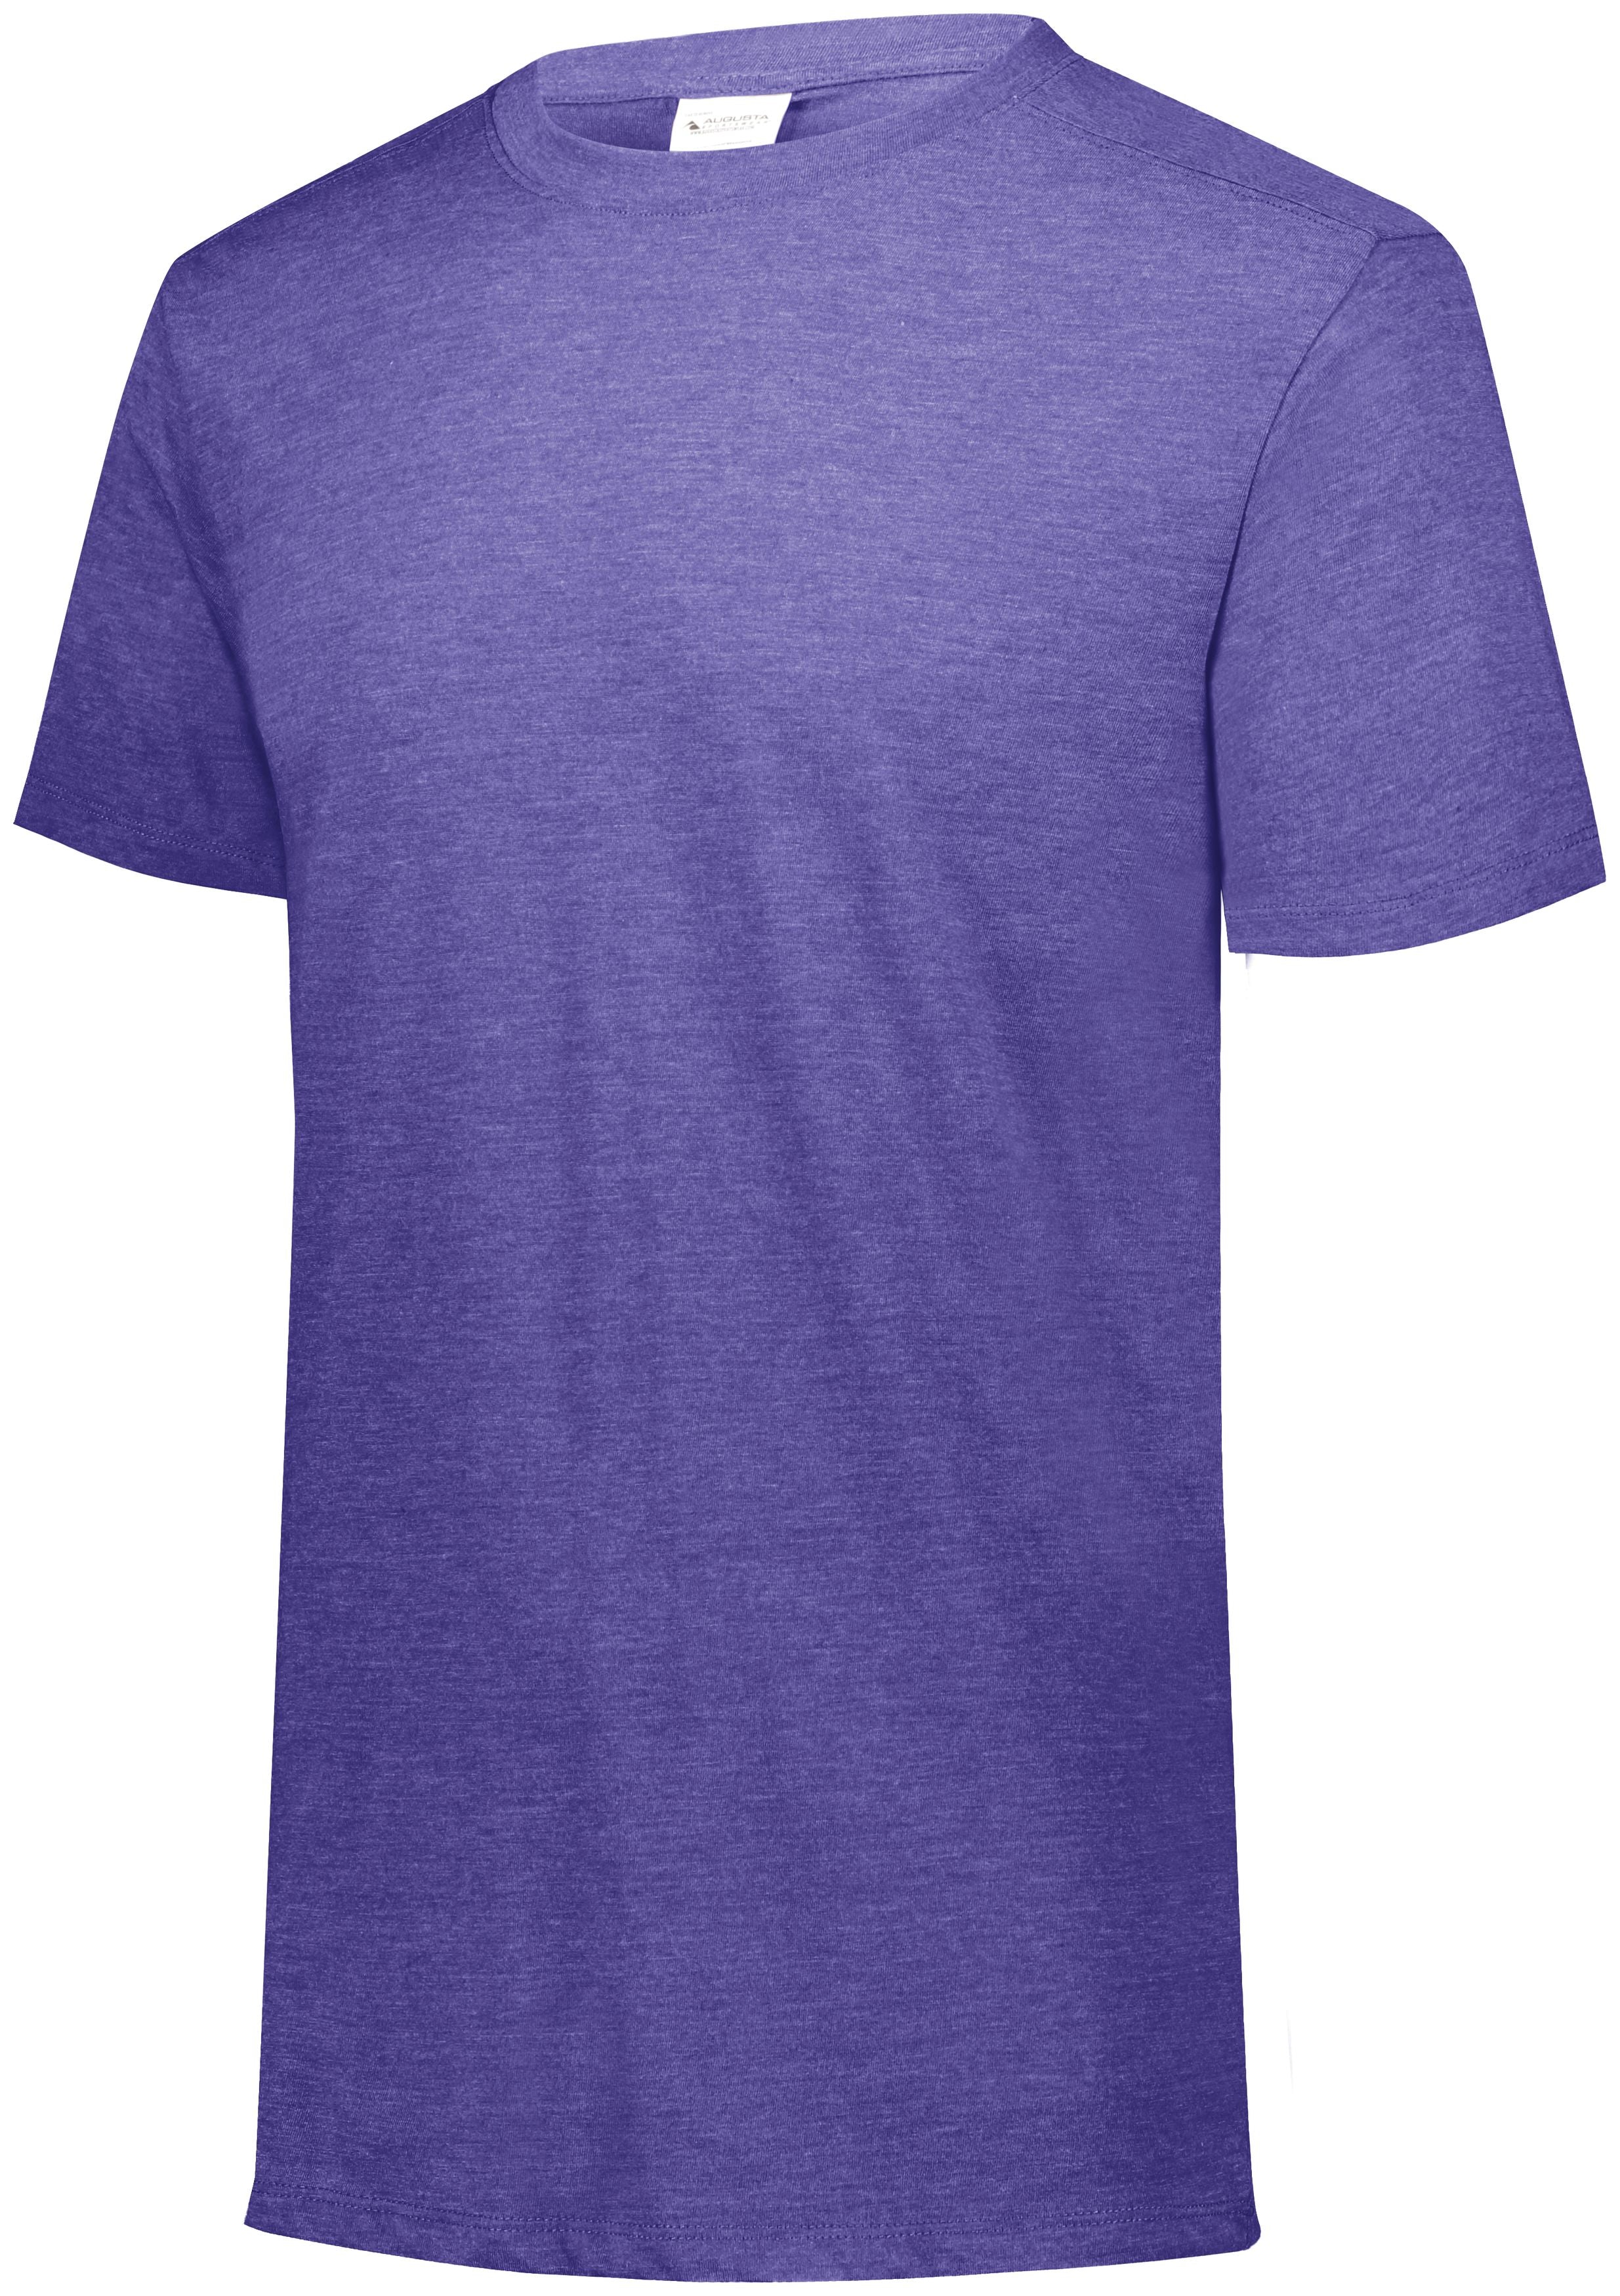 Augusta Sportswear Youth Tri-Blend T-Shirt in Purple Heather  -Part of the Youth, Youth-Tee-Shirt, T-Shirts, Augusta-Products, Shirts product lines at KanaleyCreations.com